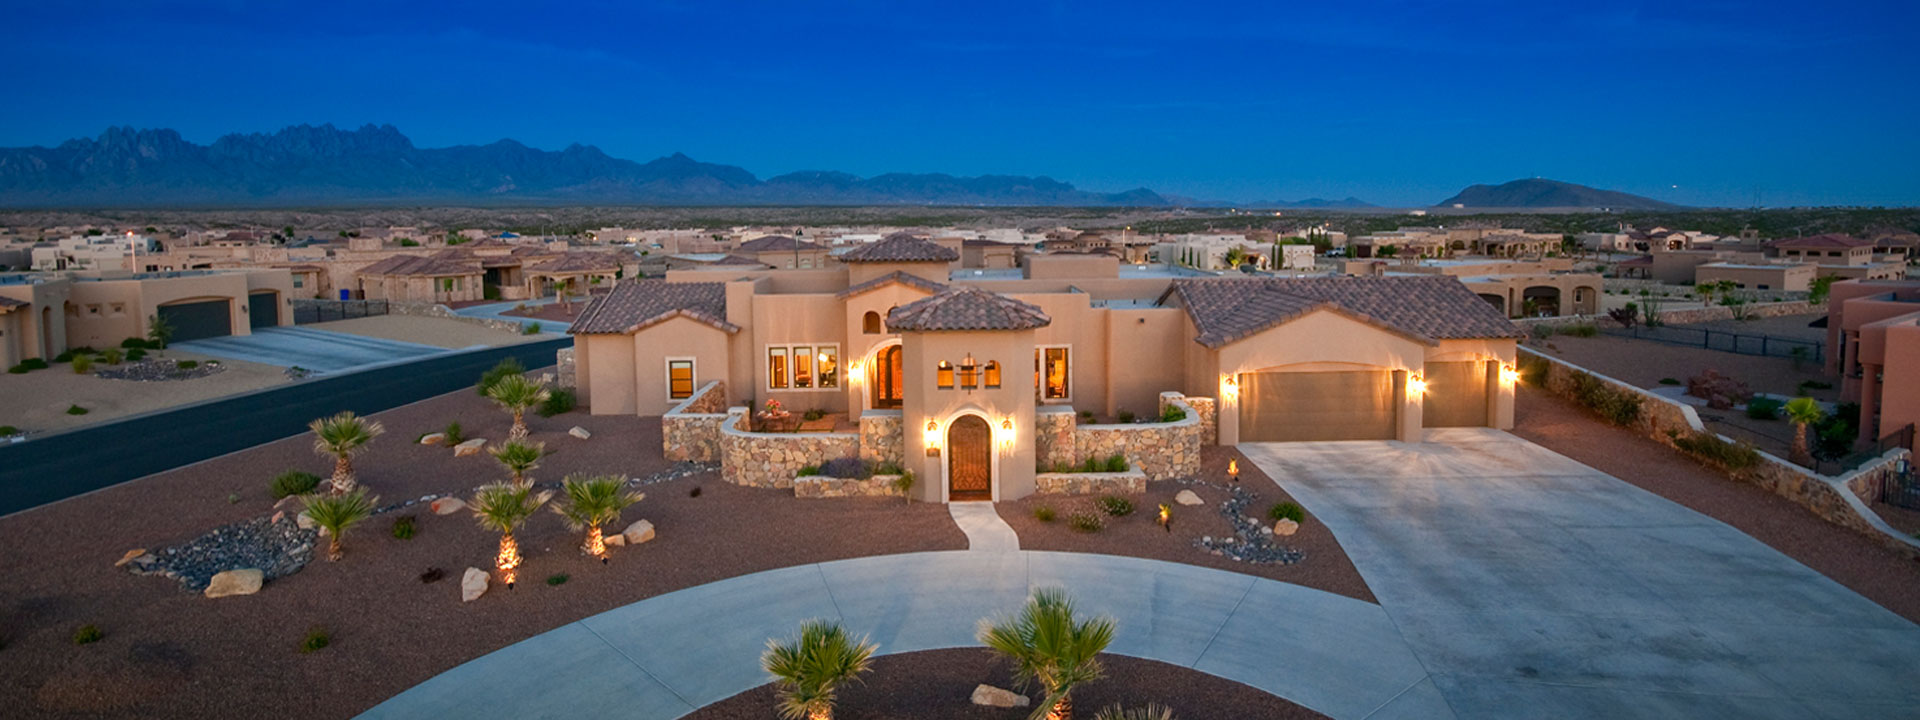 Exit Horizons | Las Cruces Real Estate | Home Search in ...